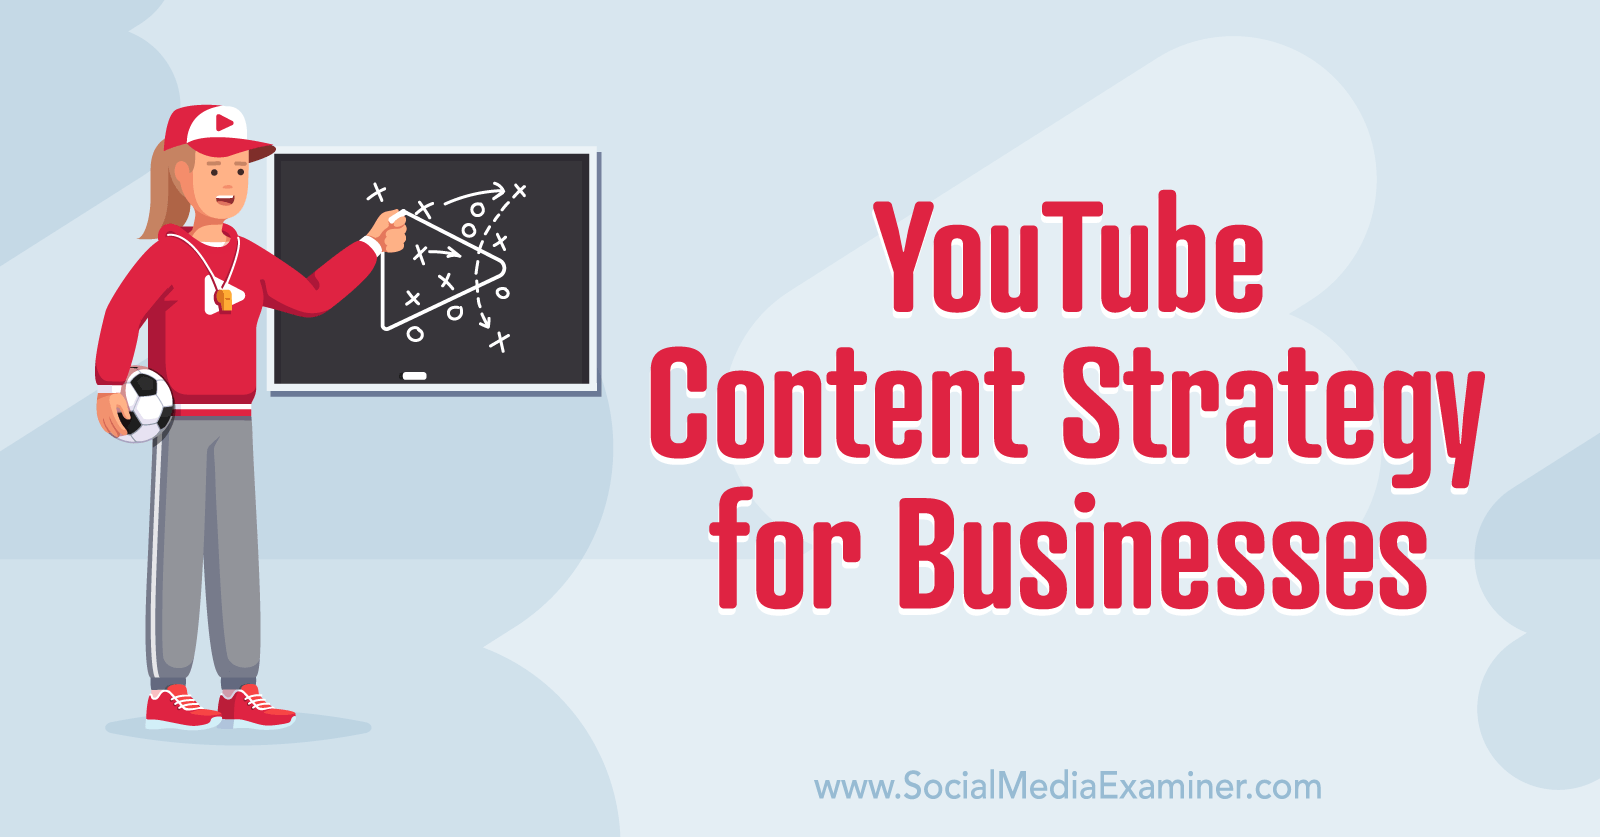 YouTube Content Strategy for Businesses by Social Media Examiner